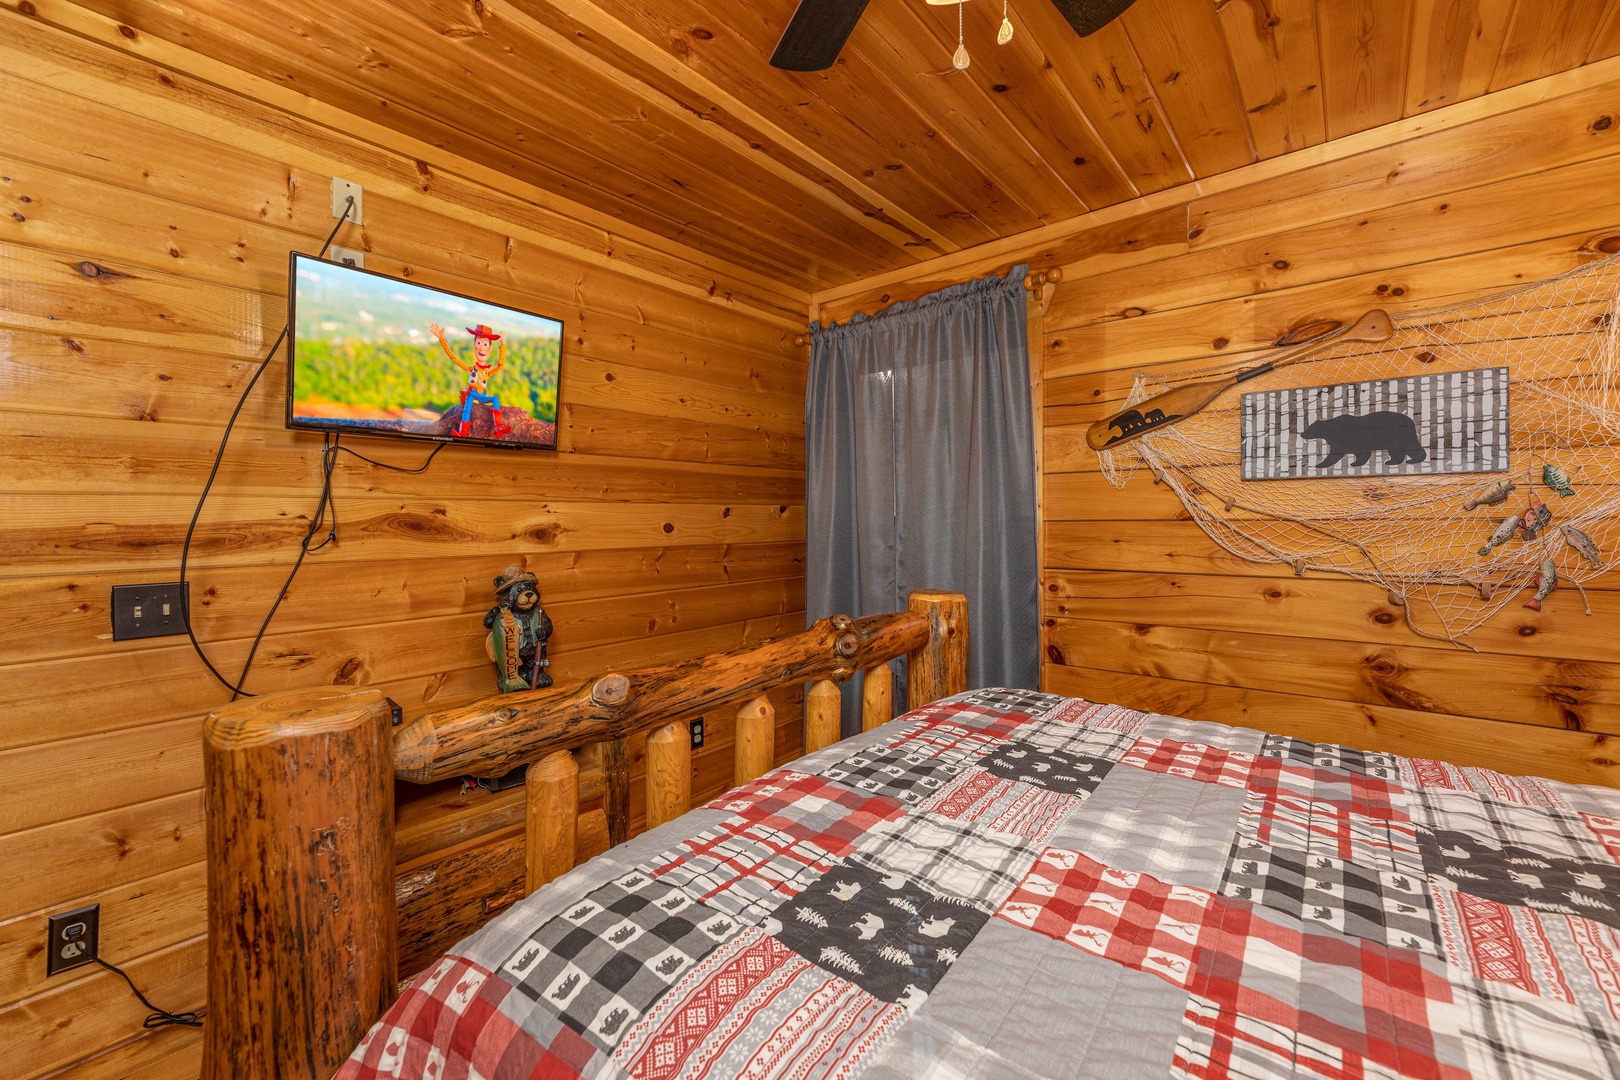 TV and dresser in a bedroom at A Bear on the Ridge, a 2 bedroom cabin rental located in Pigeon Forge